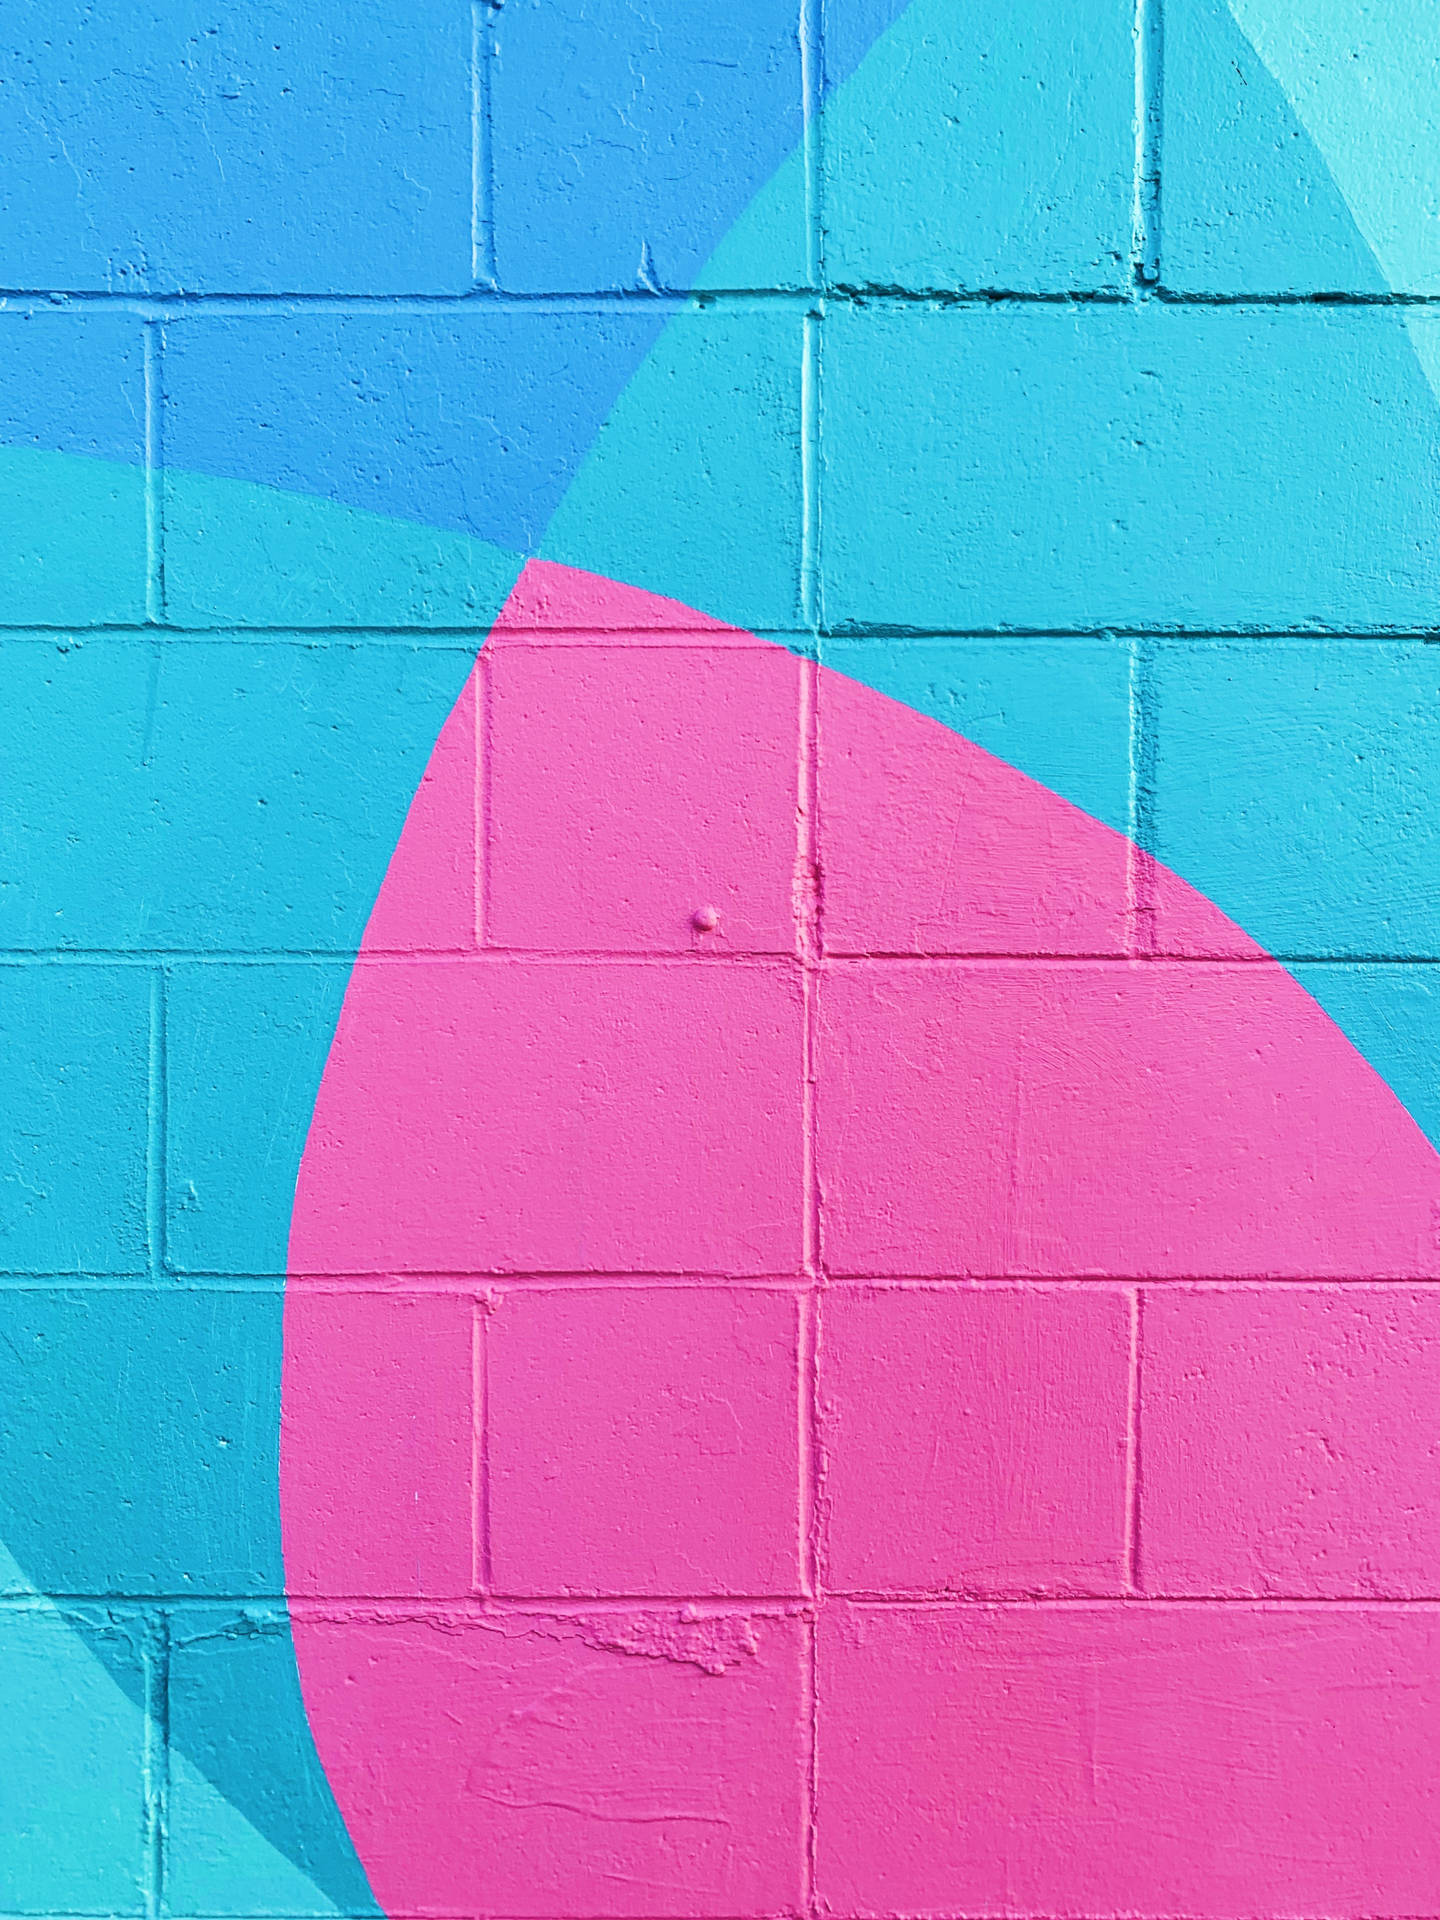 Blue And Pink Wall Art Background